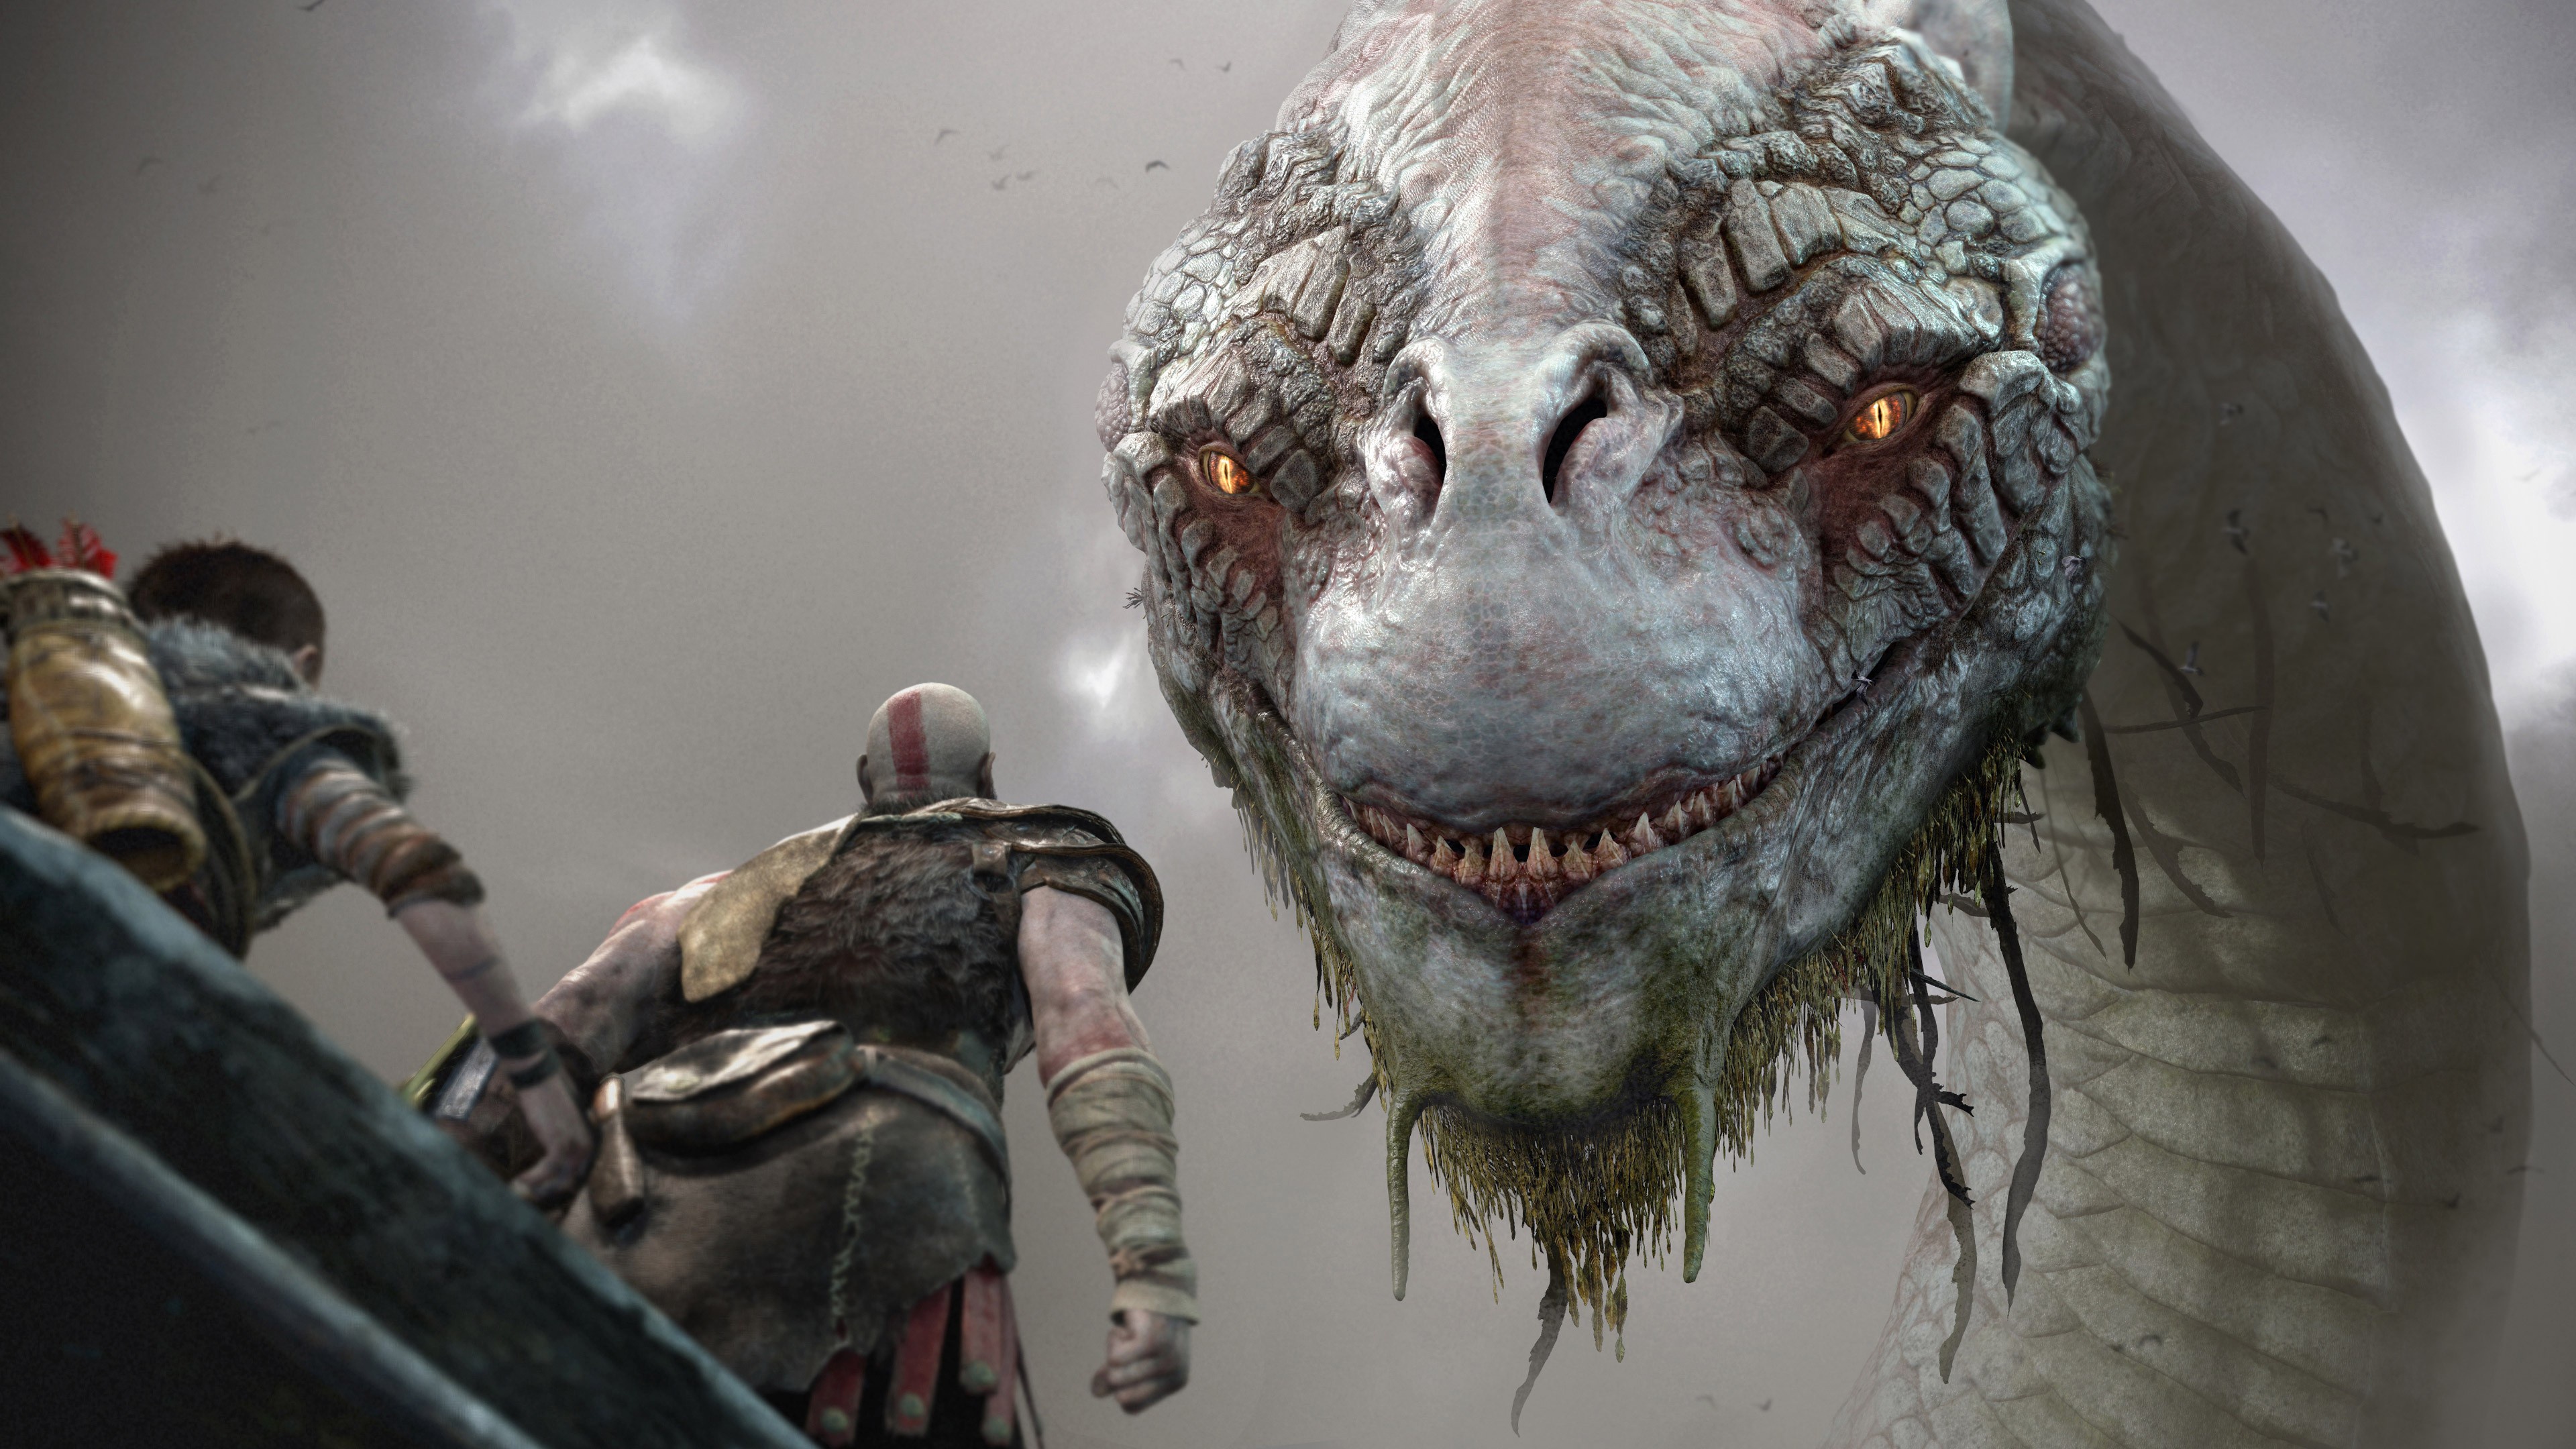 GDC 2019 Evolving Combat in 'God of War' for a New Perspective ⸺ “战神”战斗模式的全新变革 上篇